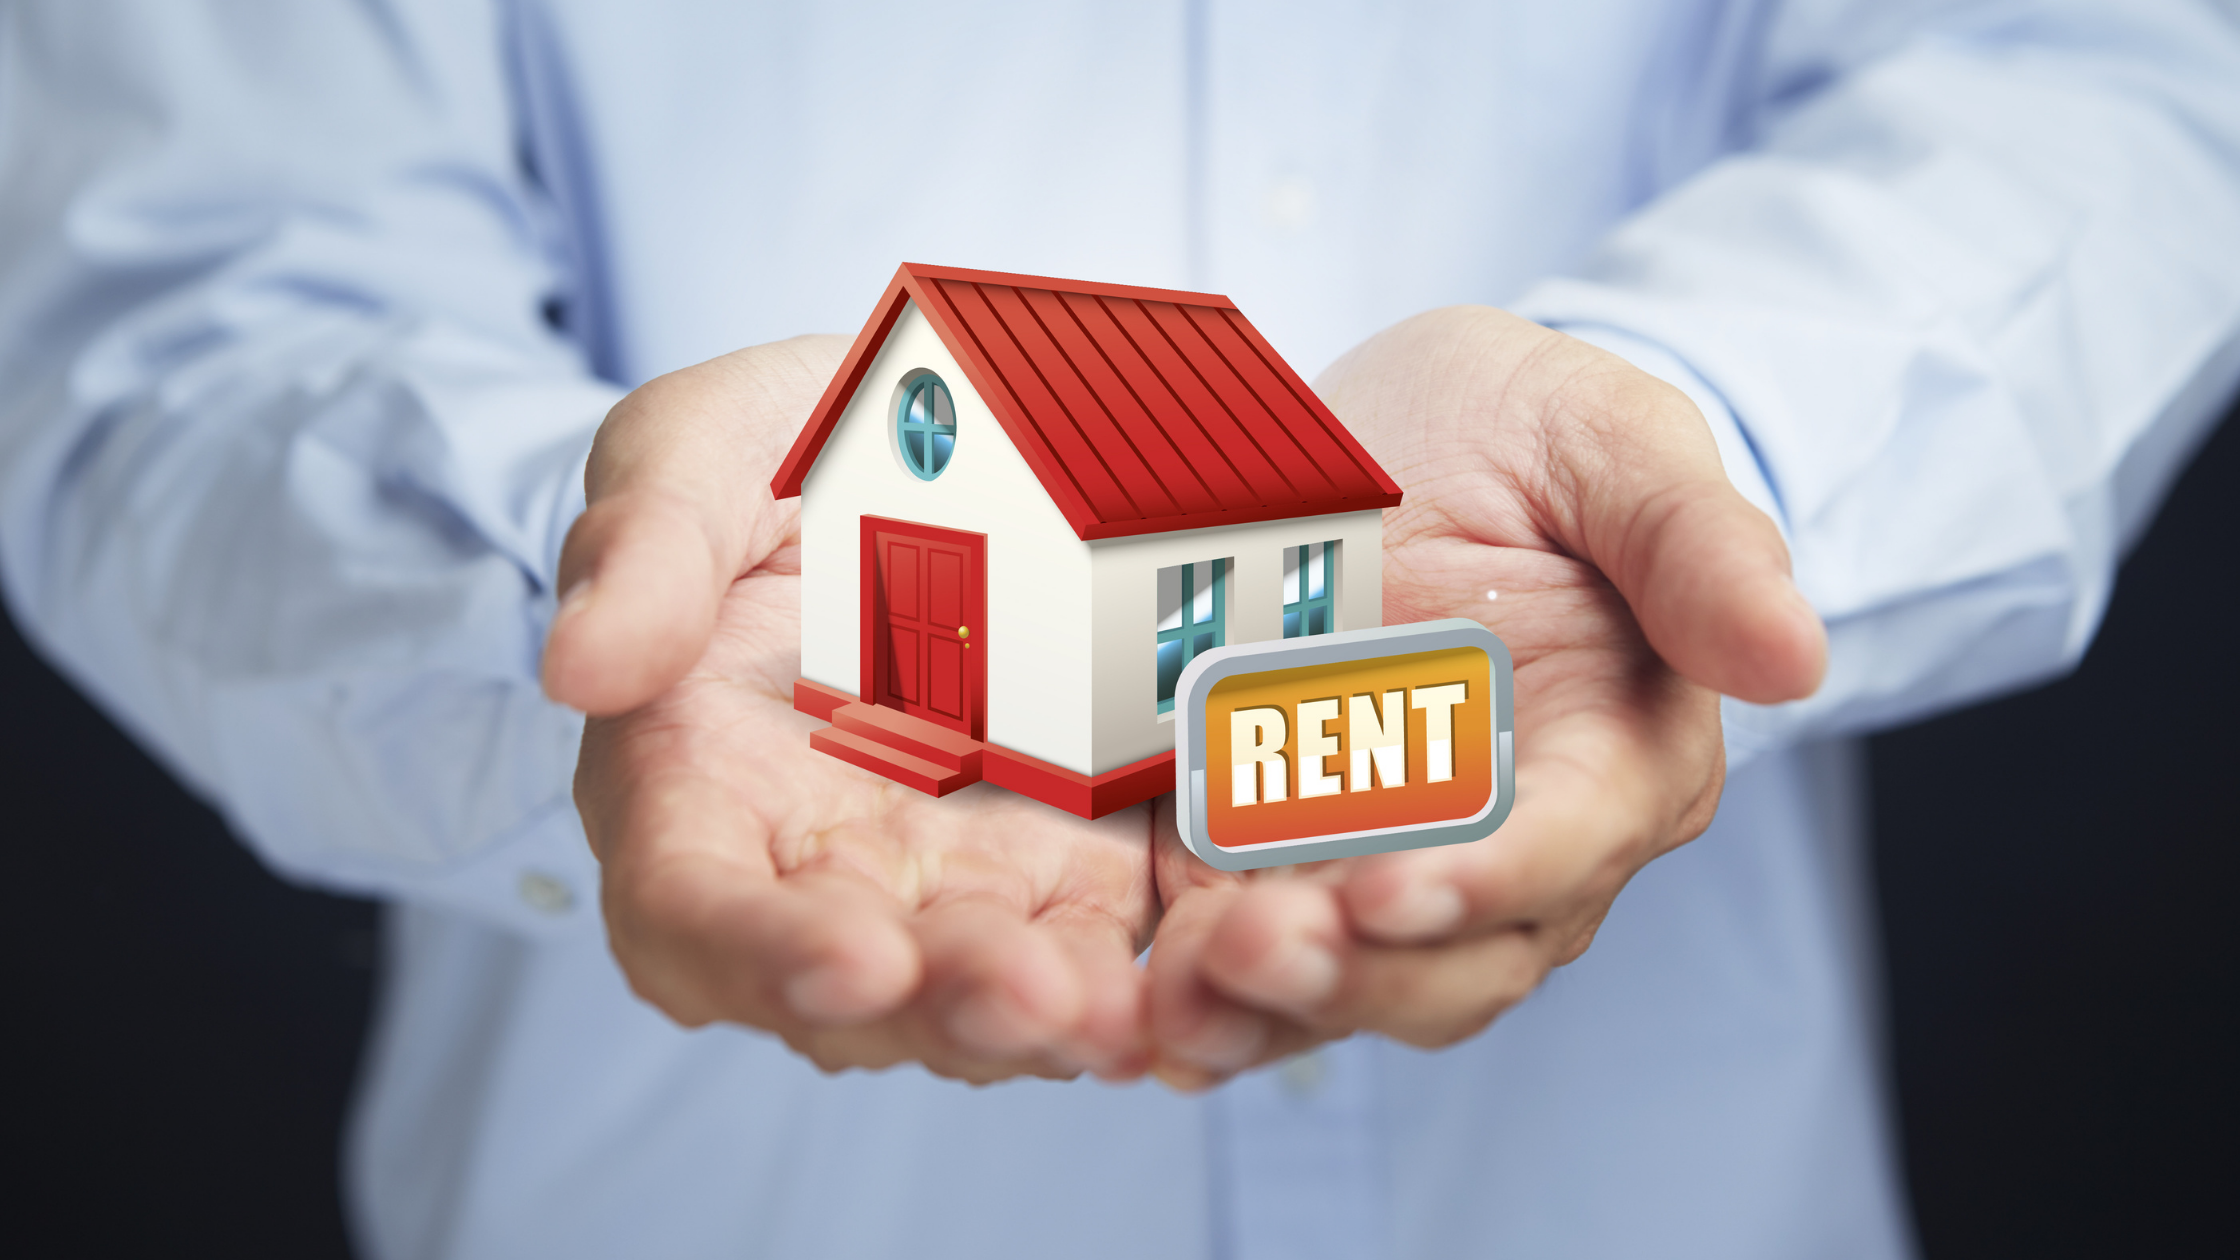 Things to Consider Before You Buy Rental Property